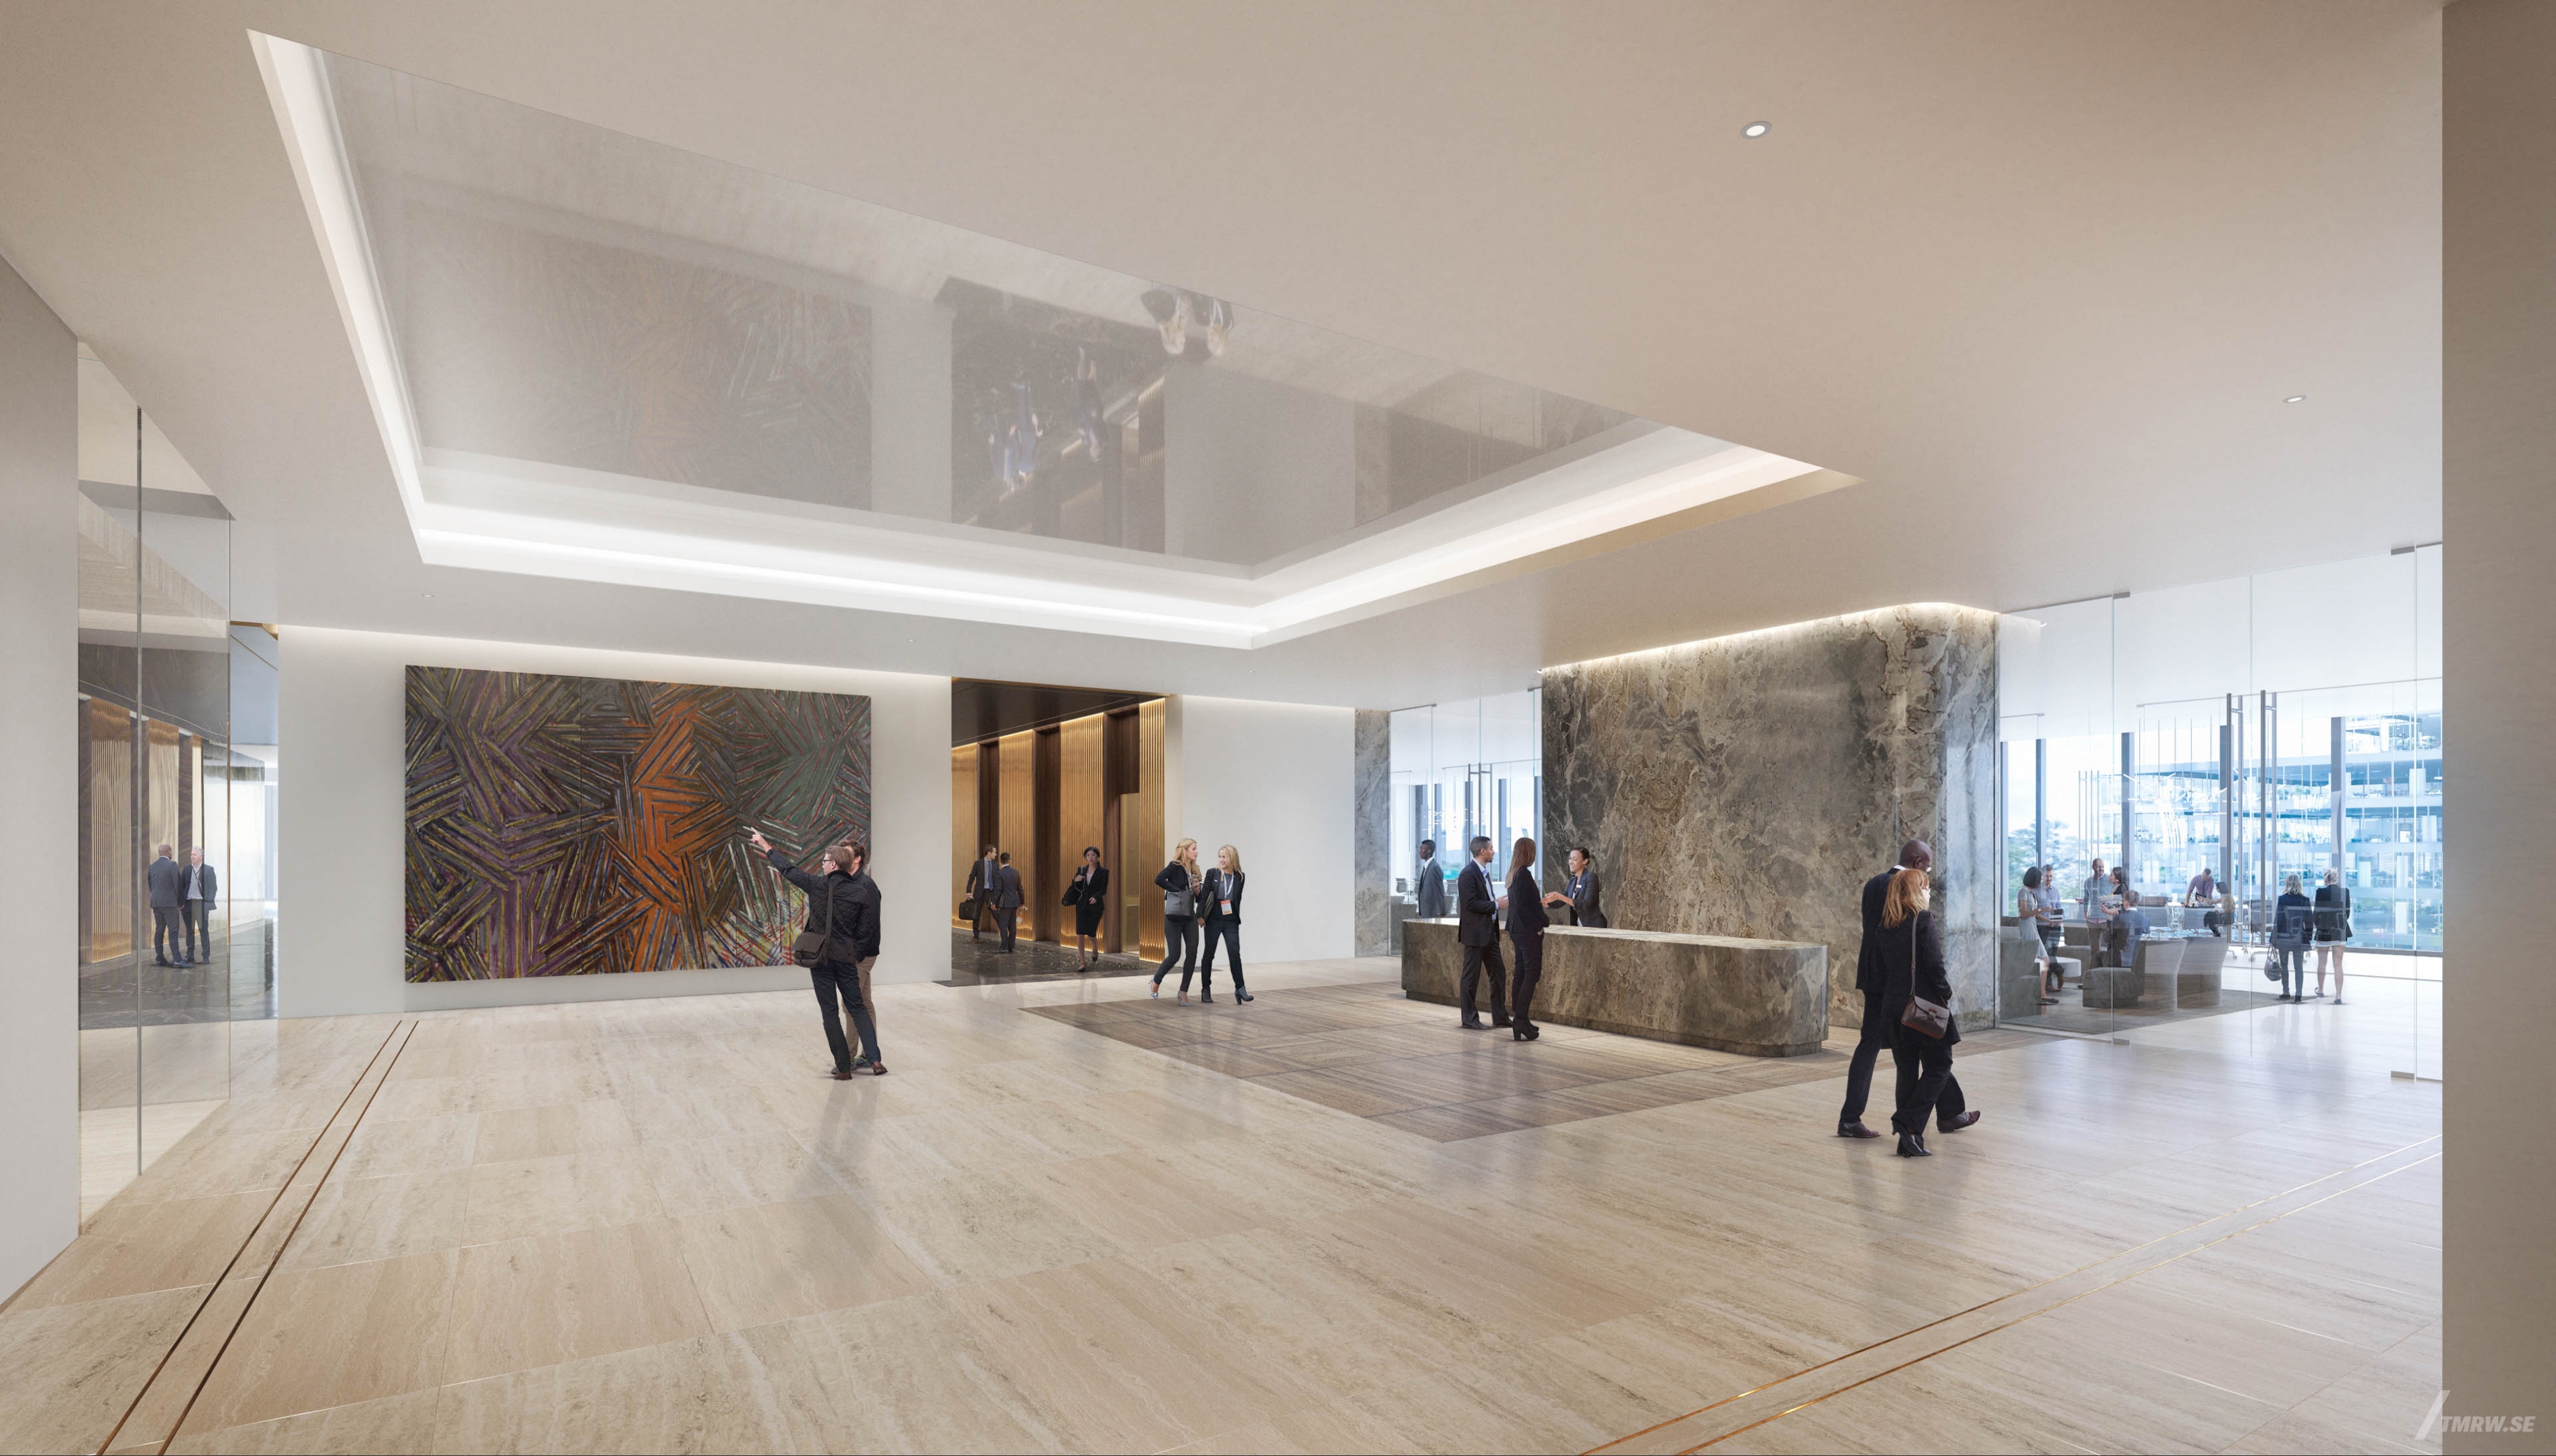 Architectural visualization of 50 Hudson Yards for Foster & Partners, a office lobby in day light from an interior view.